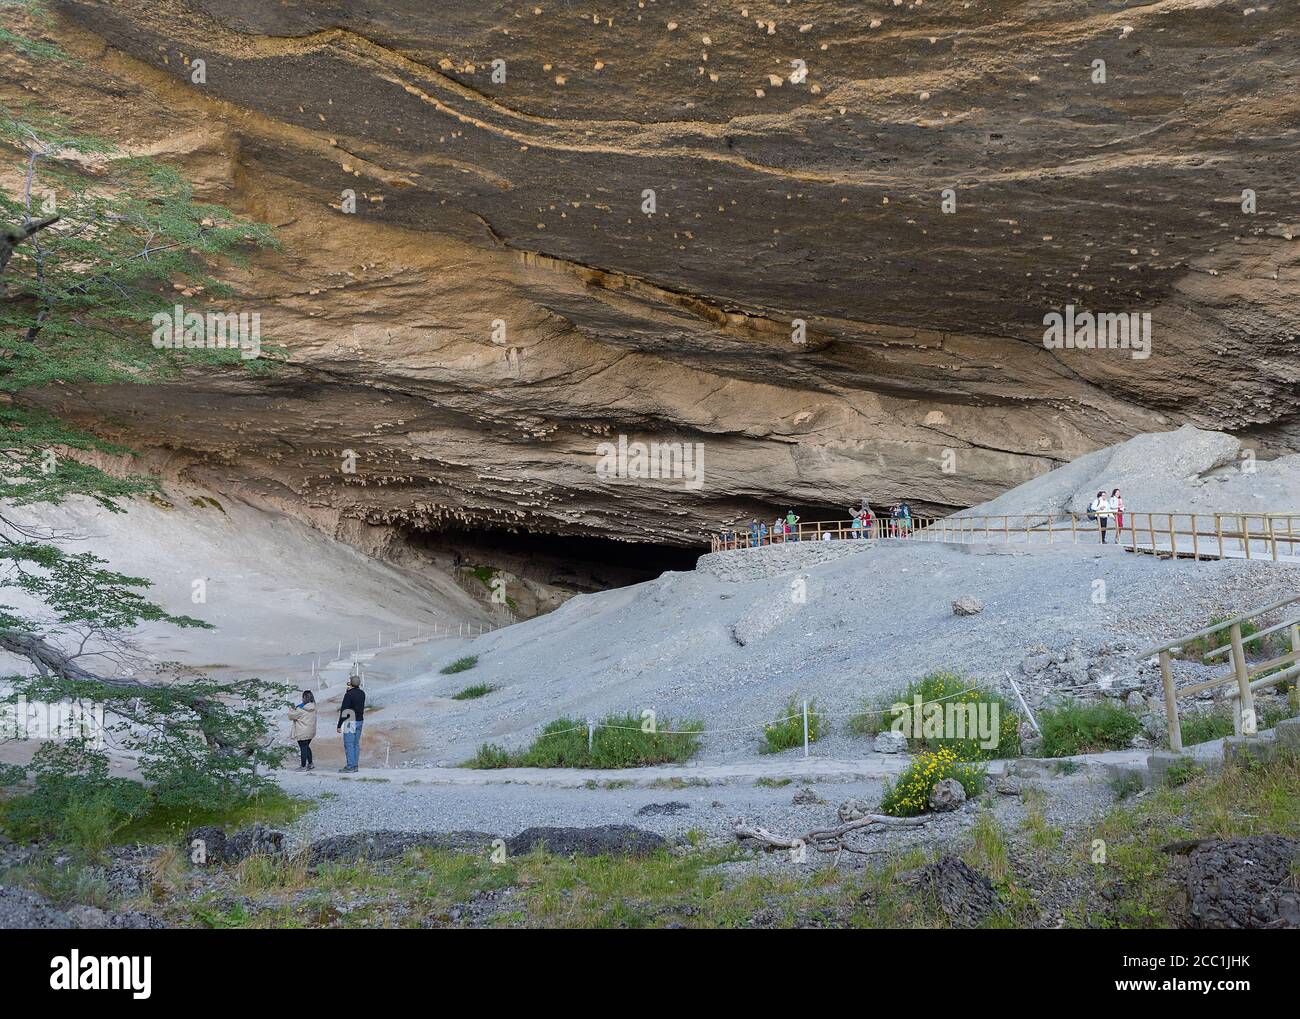 Mylodon Cave natural monument near Puerto Natales, Chile Stock Photo